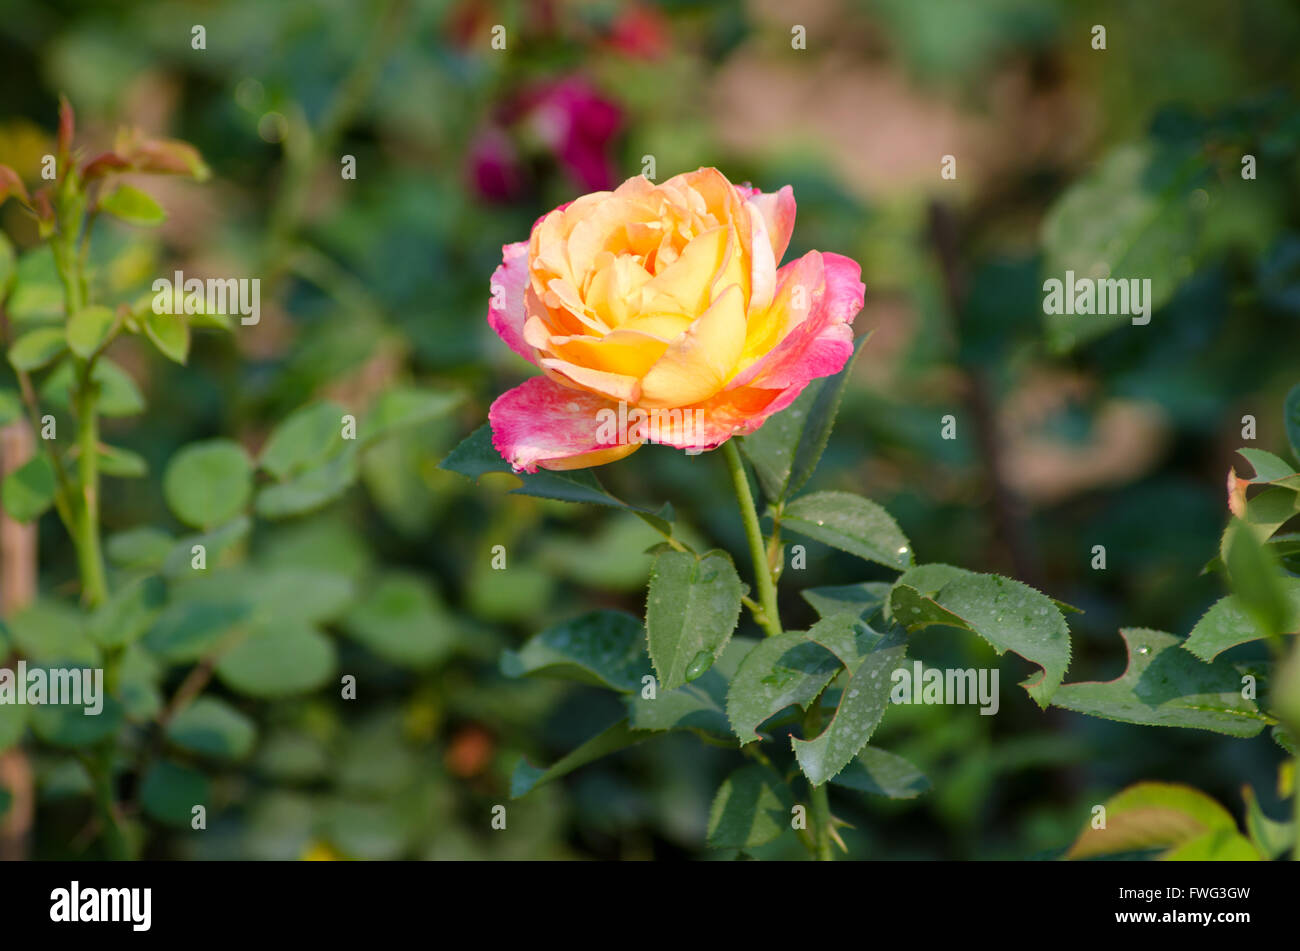 Pink and yellow rose Stock Photo